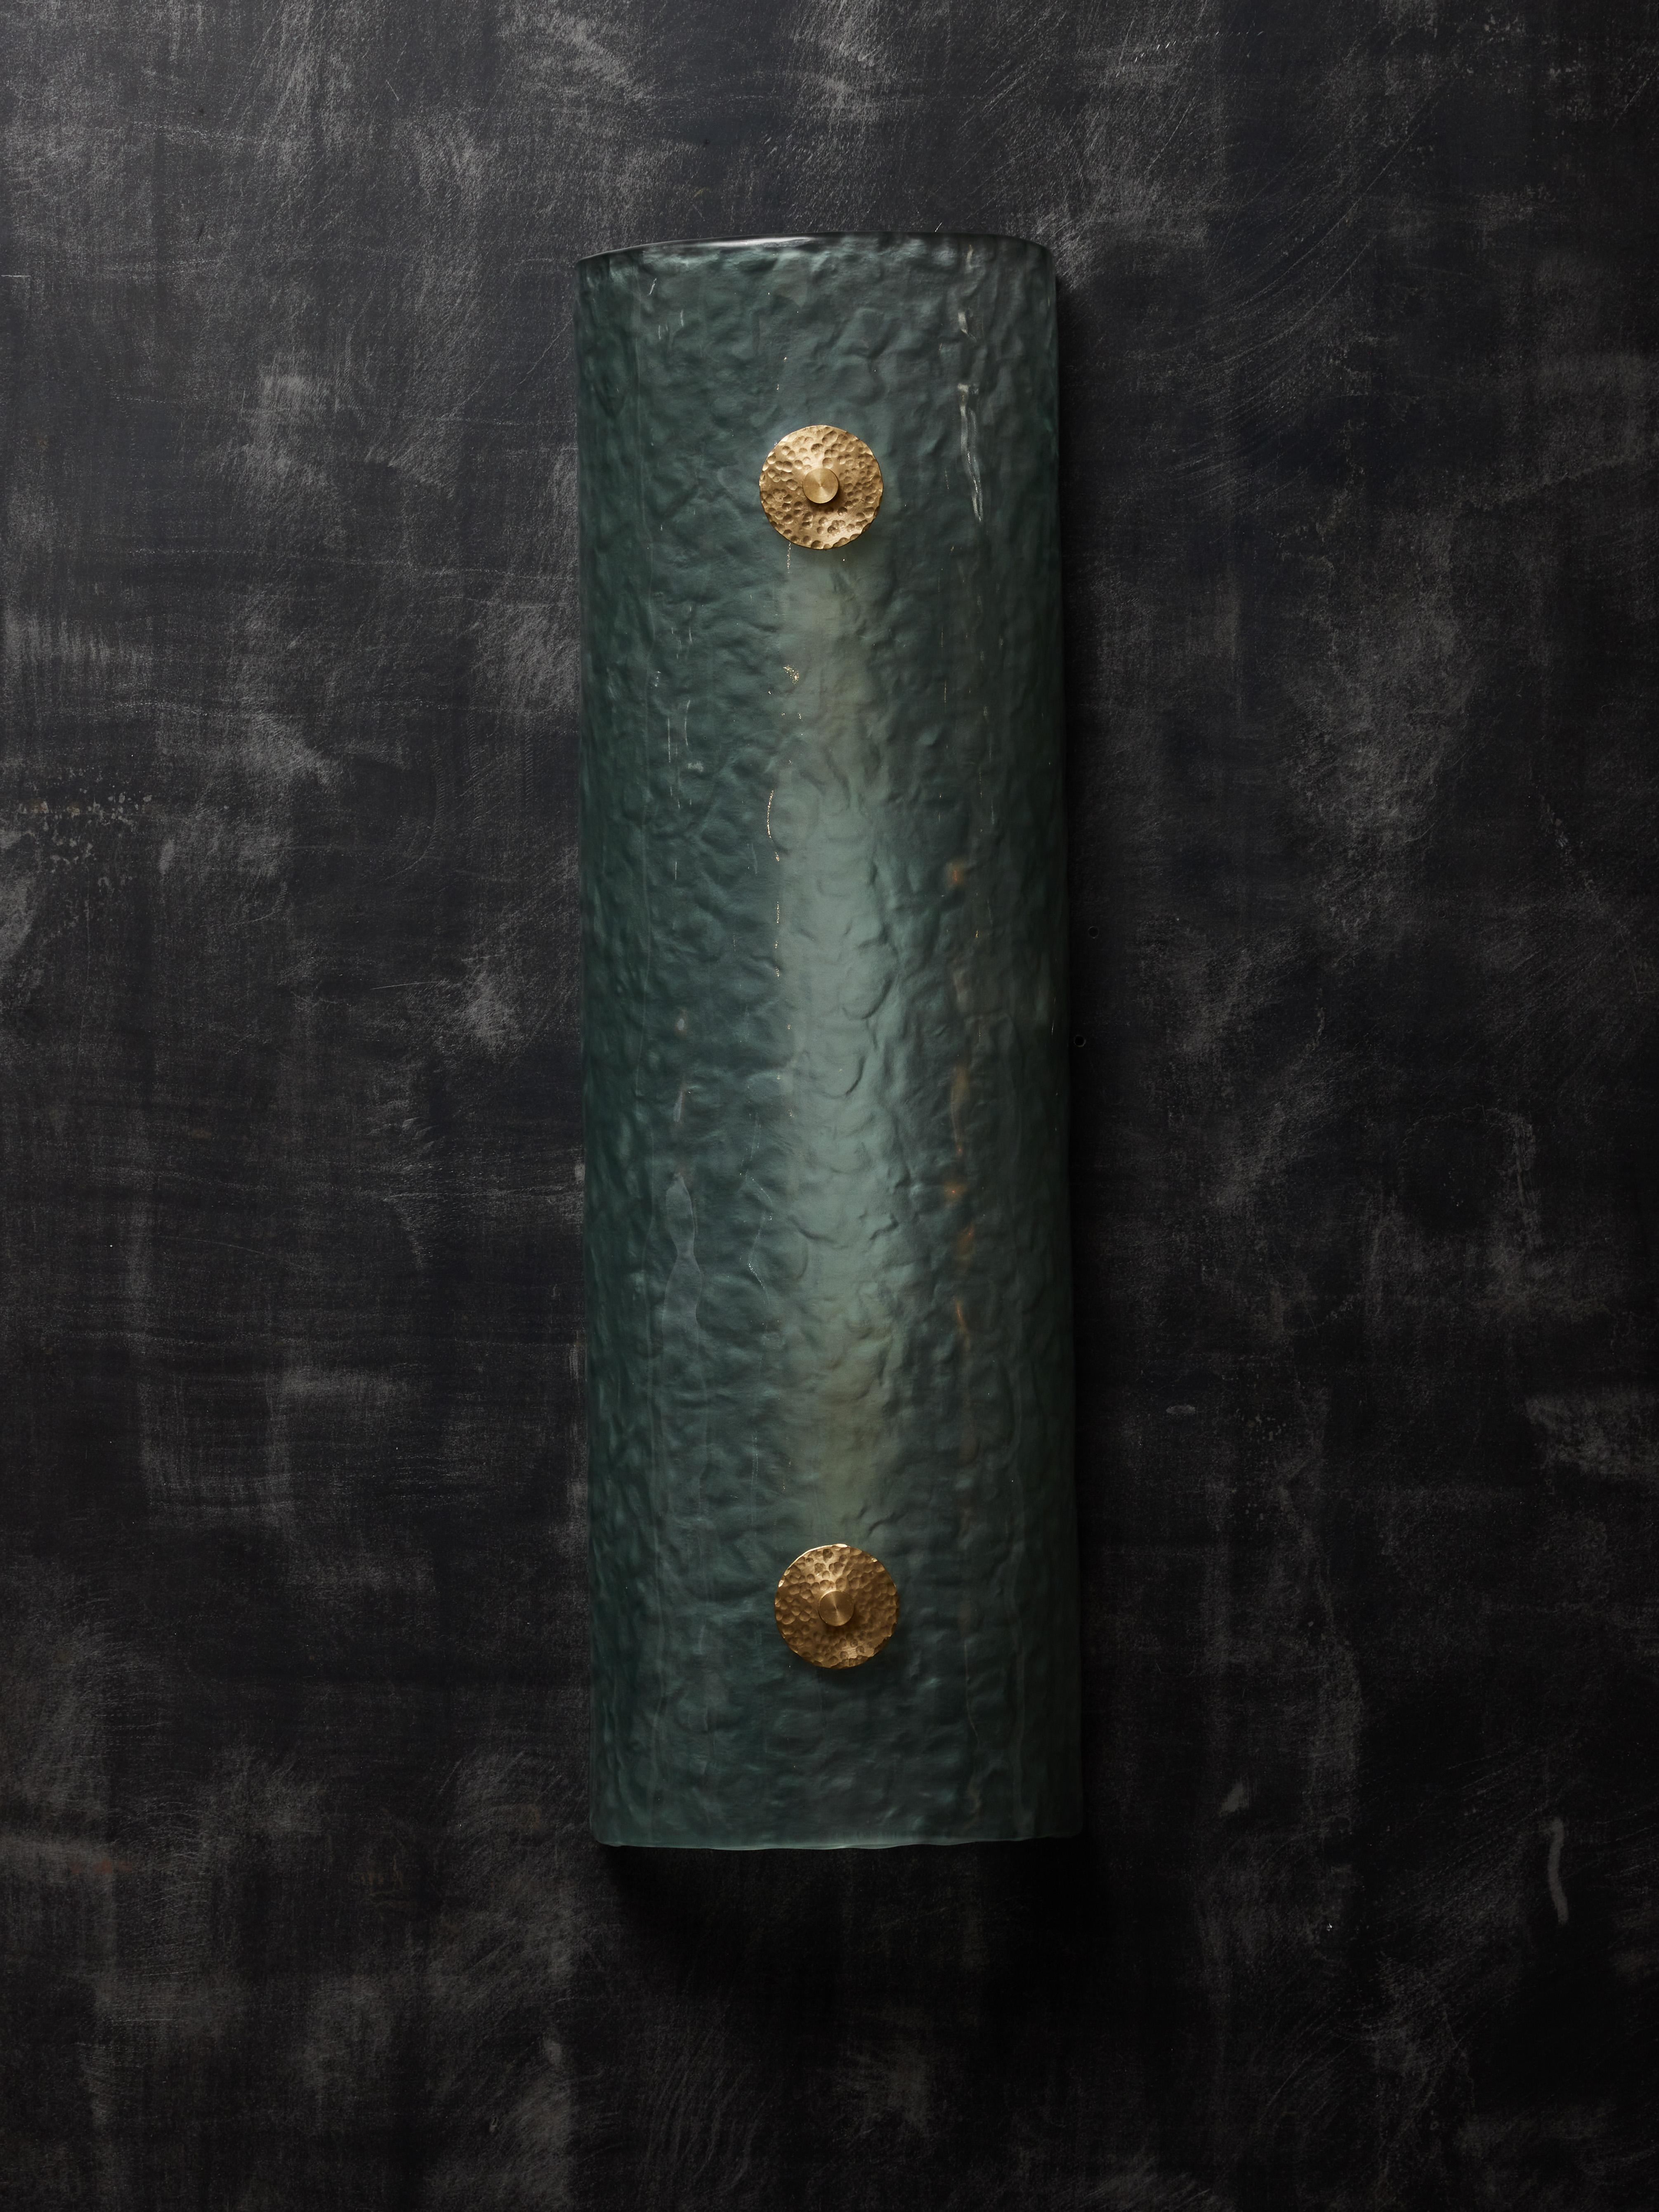 Teal curved Murano glass wall sconces with hammered brass washers.

Two sources of light per sconce